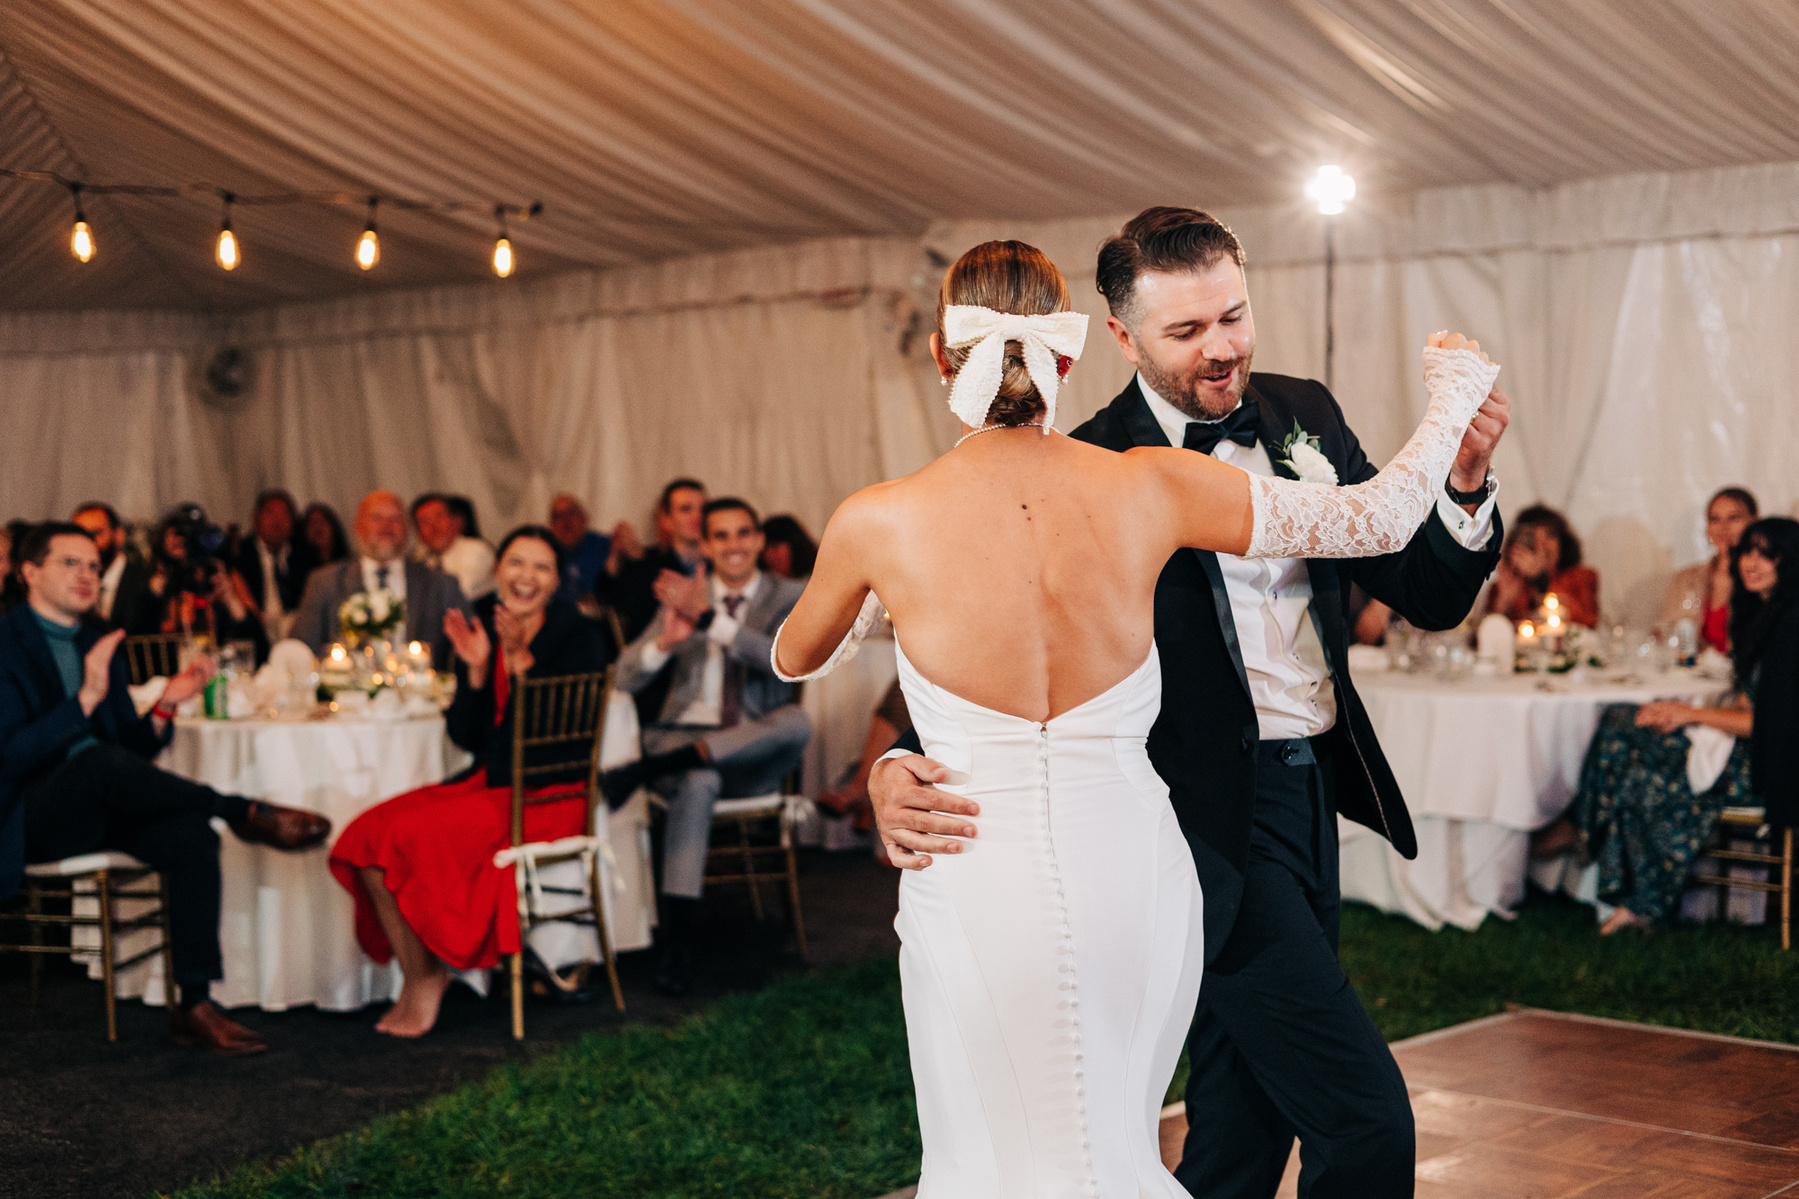 bride and groom first dance tented wedding reception at glenhardie country club near philadelphia pennsylvania main line chester county